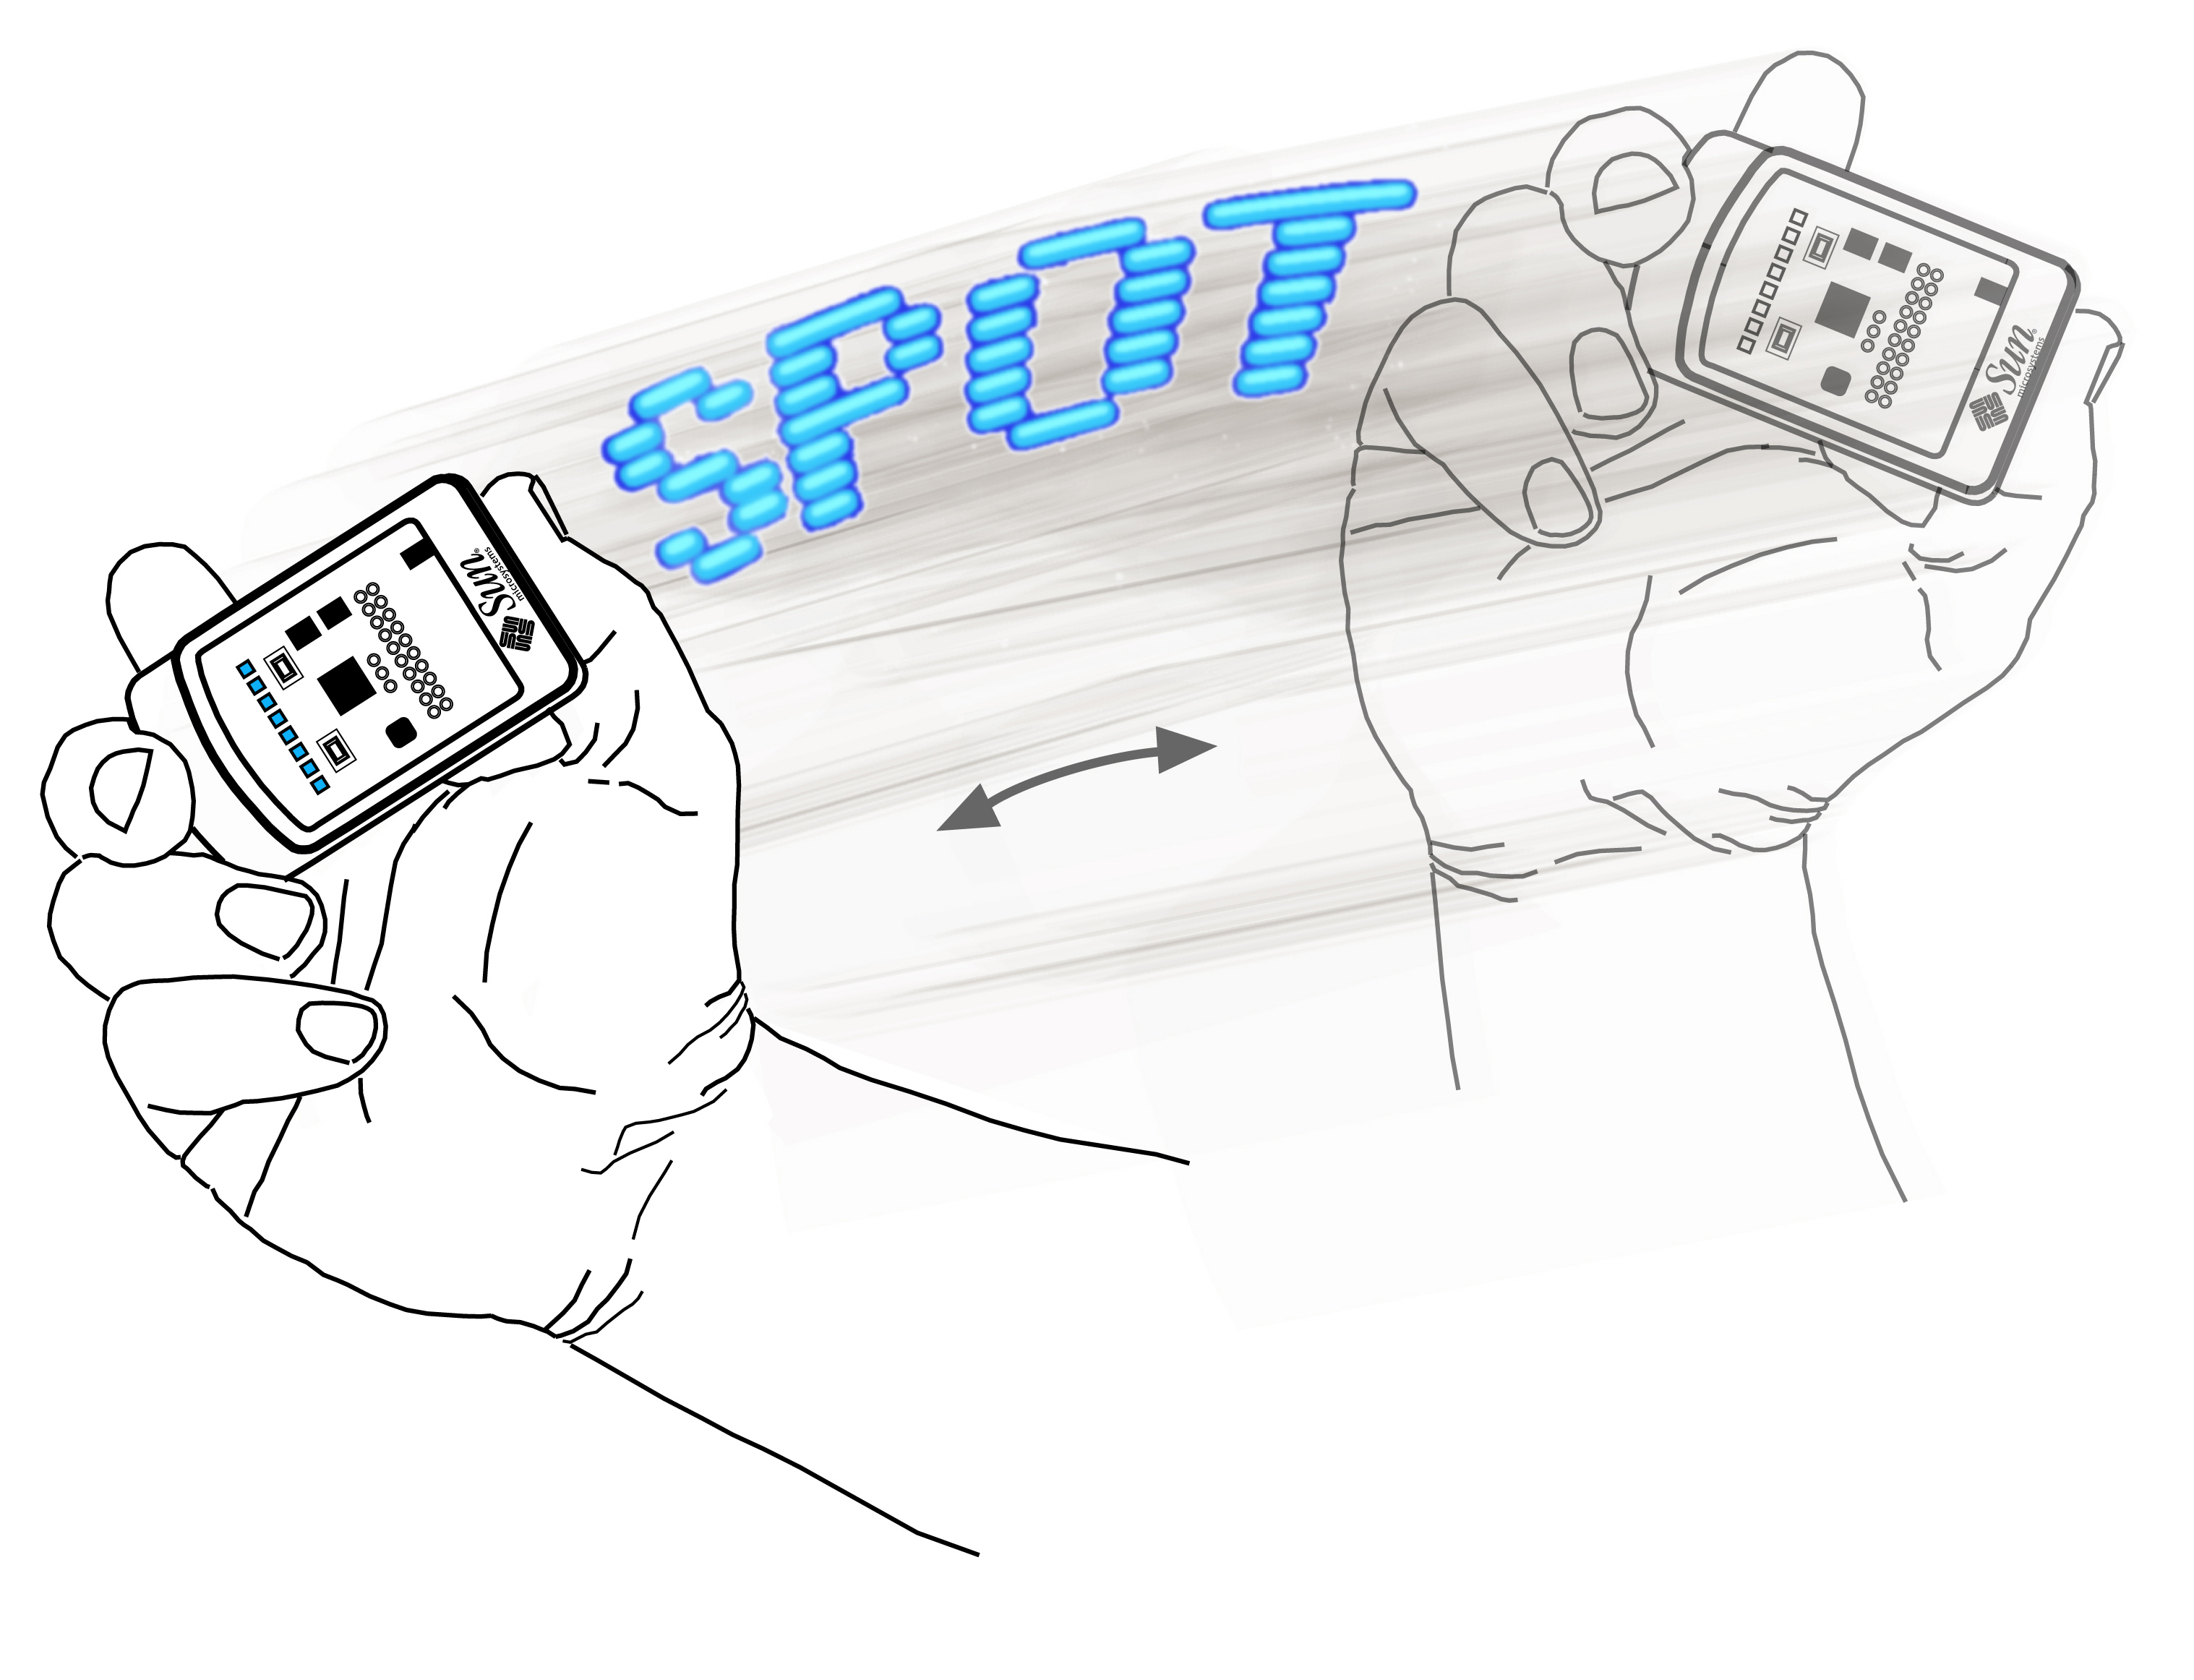 This is a drawing of someone holding a Sun SPOT in their right hand, with the eDemo board facing towards the viewer and the radio fin to the viewer's left.  The hand is moving the SPOT very rapidly from left to right and the LEDs are blinking as it moves.  It has the effect of spelling out 'SPOT' in the air as the LEDs blink on and off.